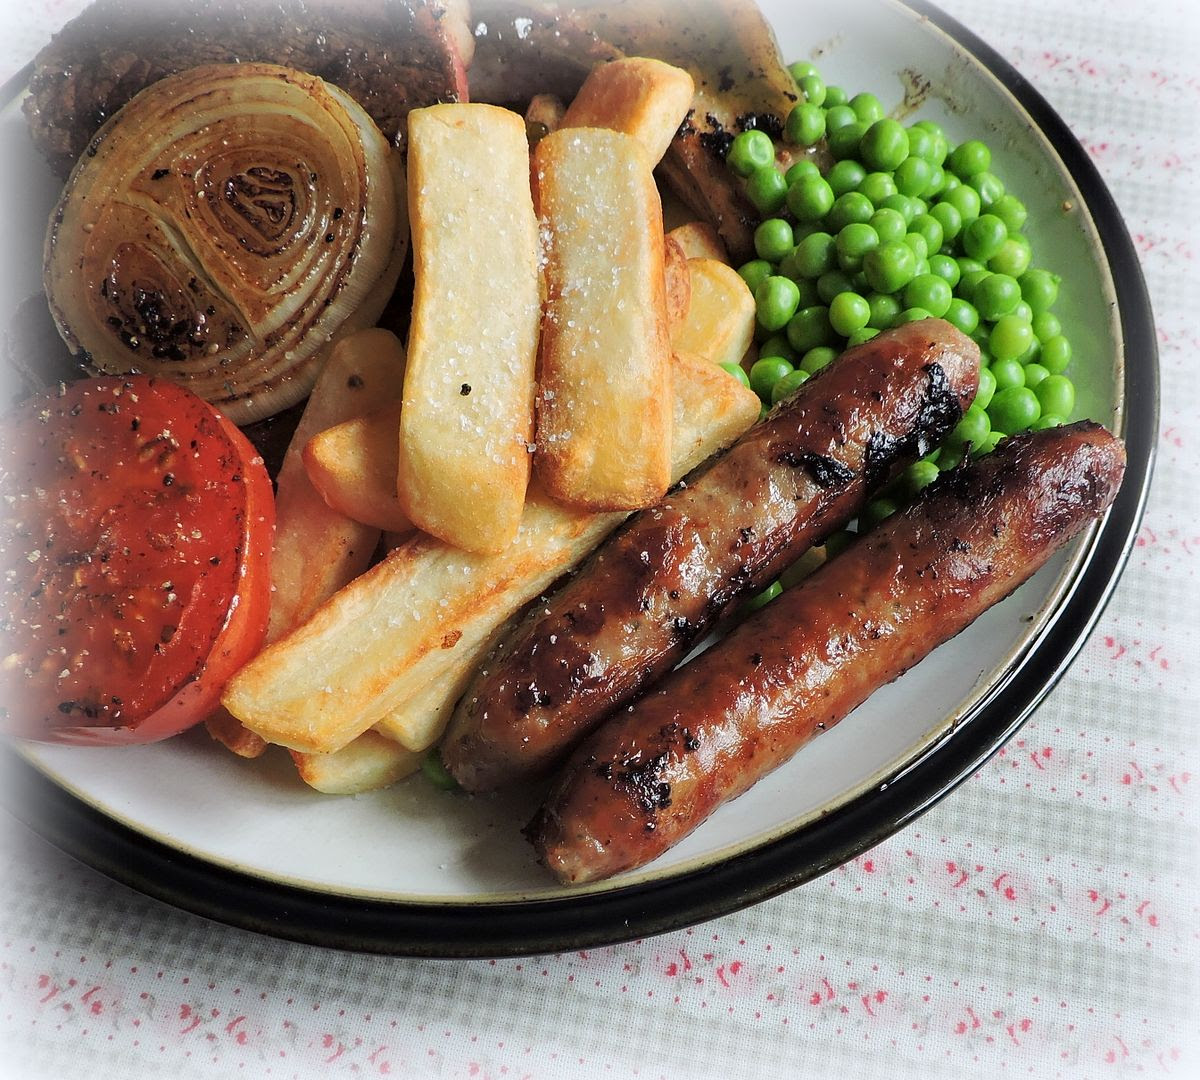 The English Kitchen: A Mixed Grill